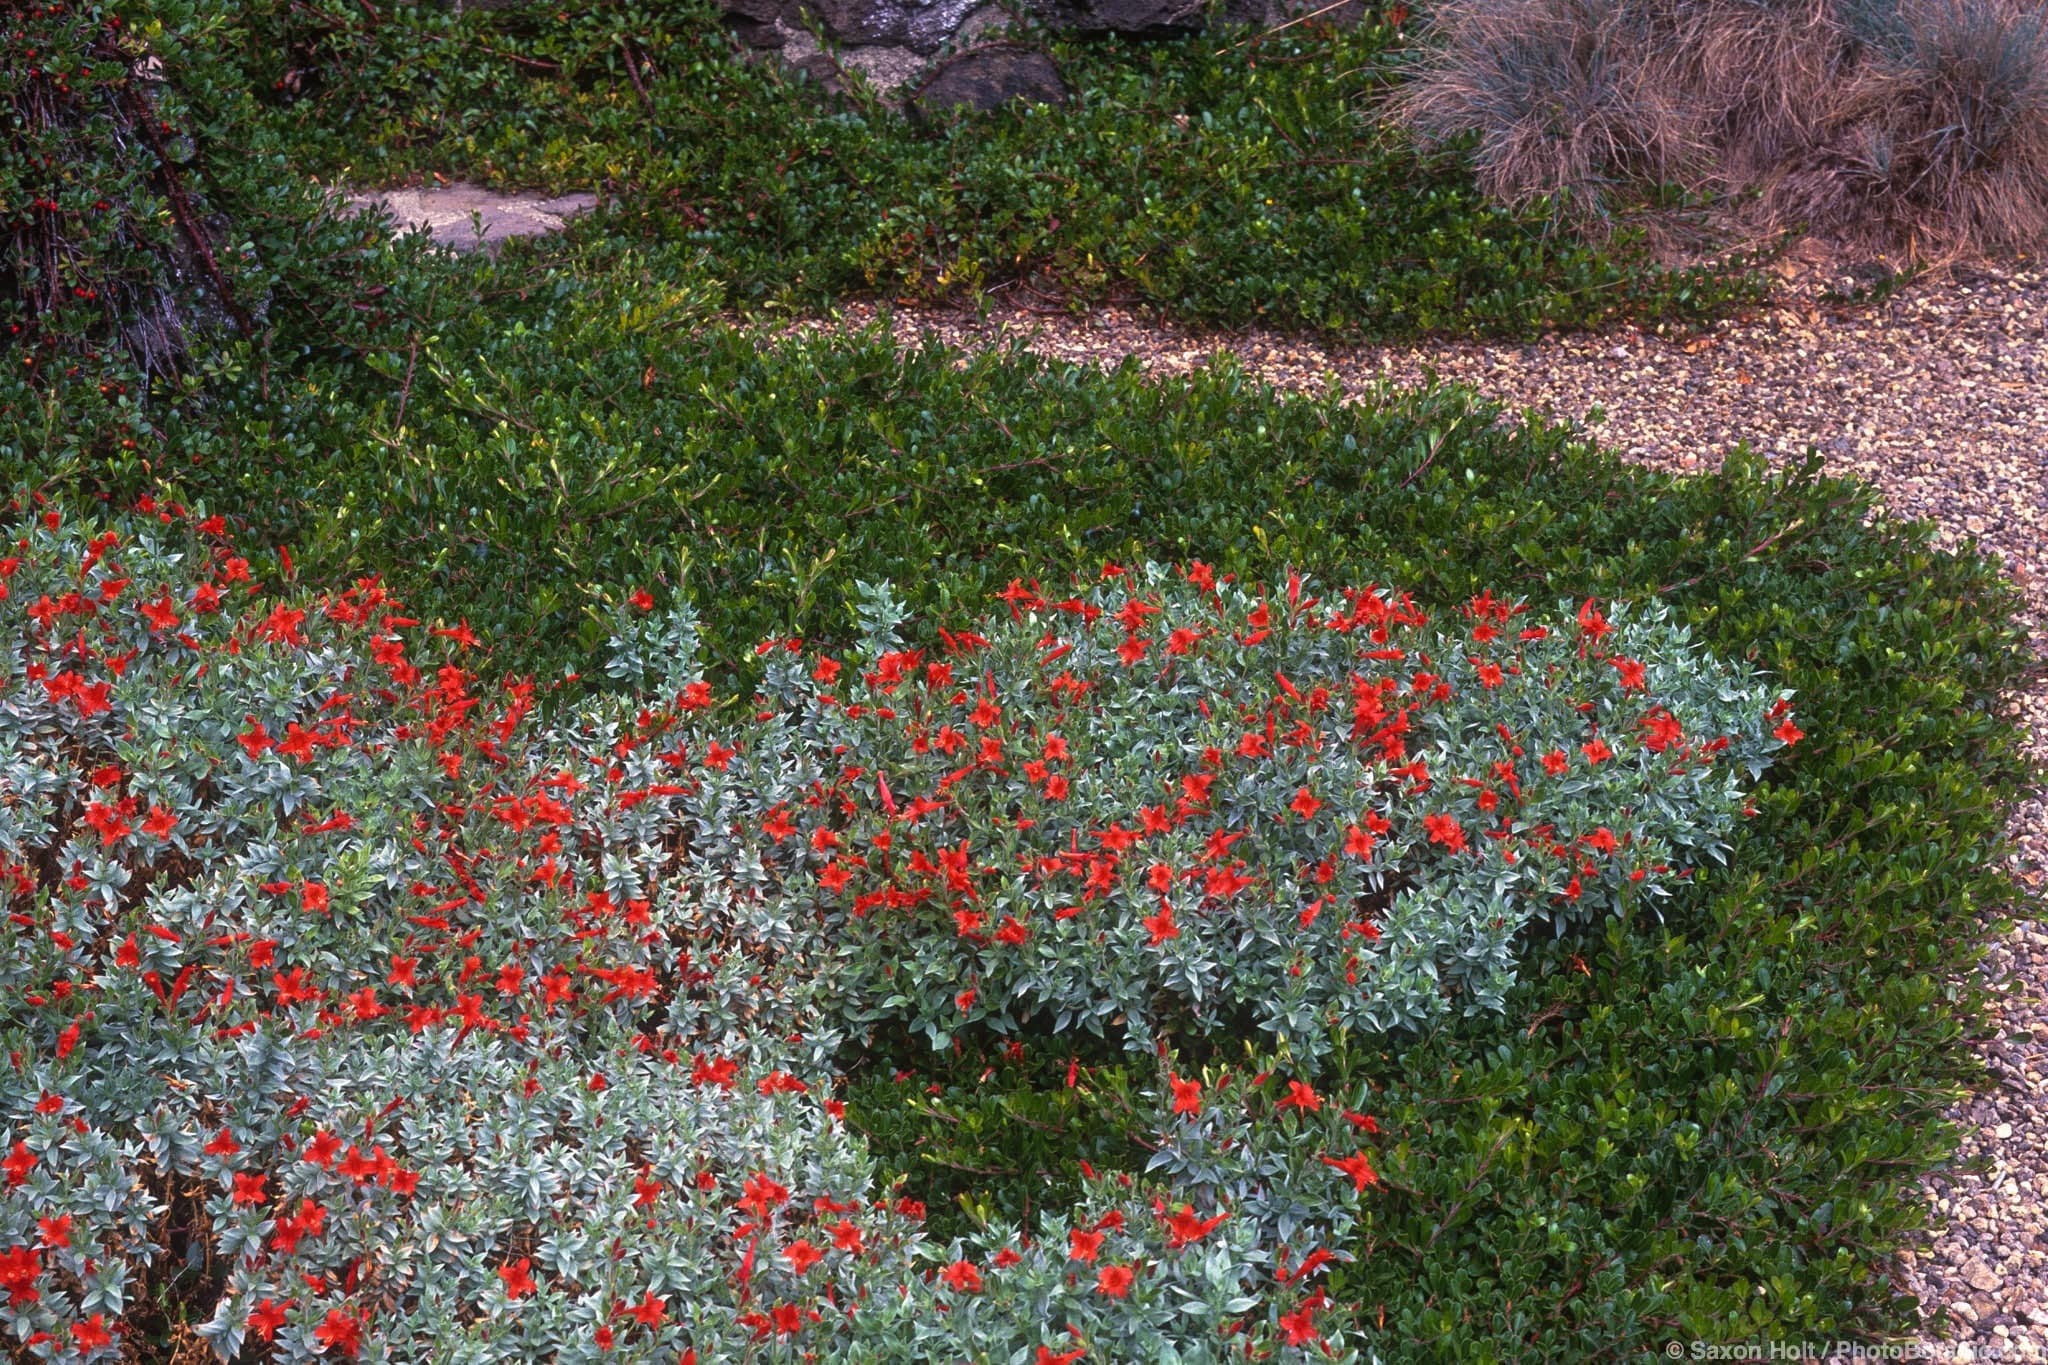 Epilobium septentrionale 'Select Maytole' (California Fuchsia) silver gray foliage native groundcover in flower with Arctostaphylos